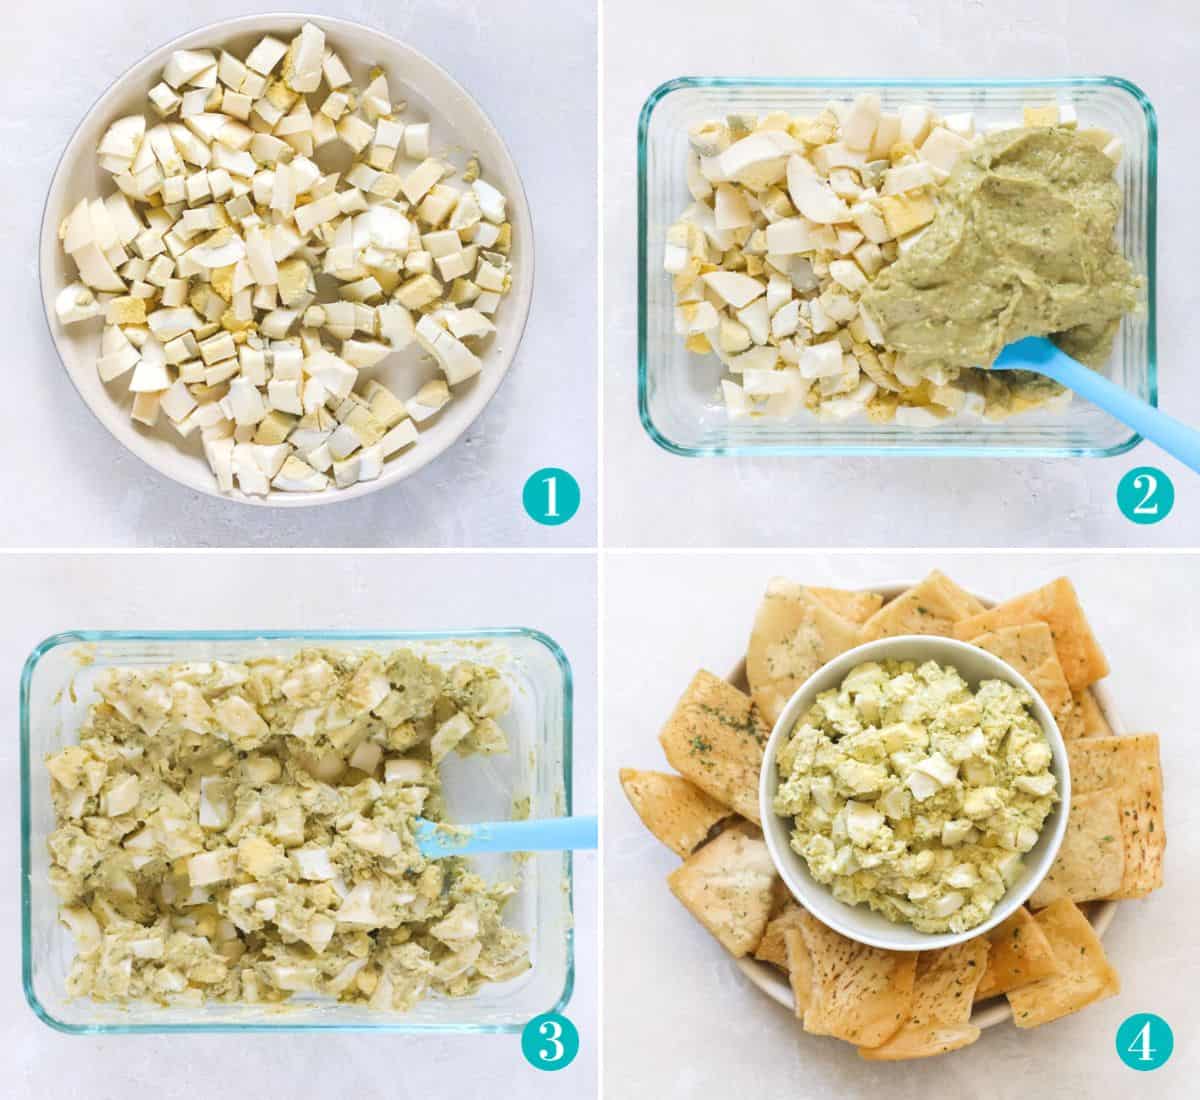 four photo collage with a plate of chopped hard-boiled eggs, chopped eggs and hummus in a glass storage container, eggs and hummus being mixed together in glass container, and a plate of pita chips with a bowl of hummus egg salad.